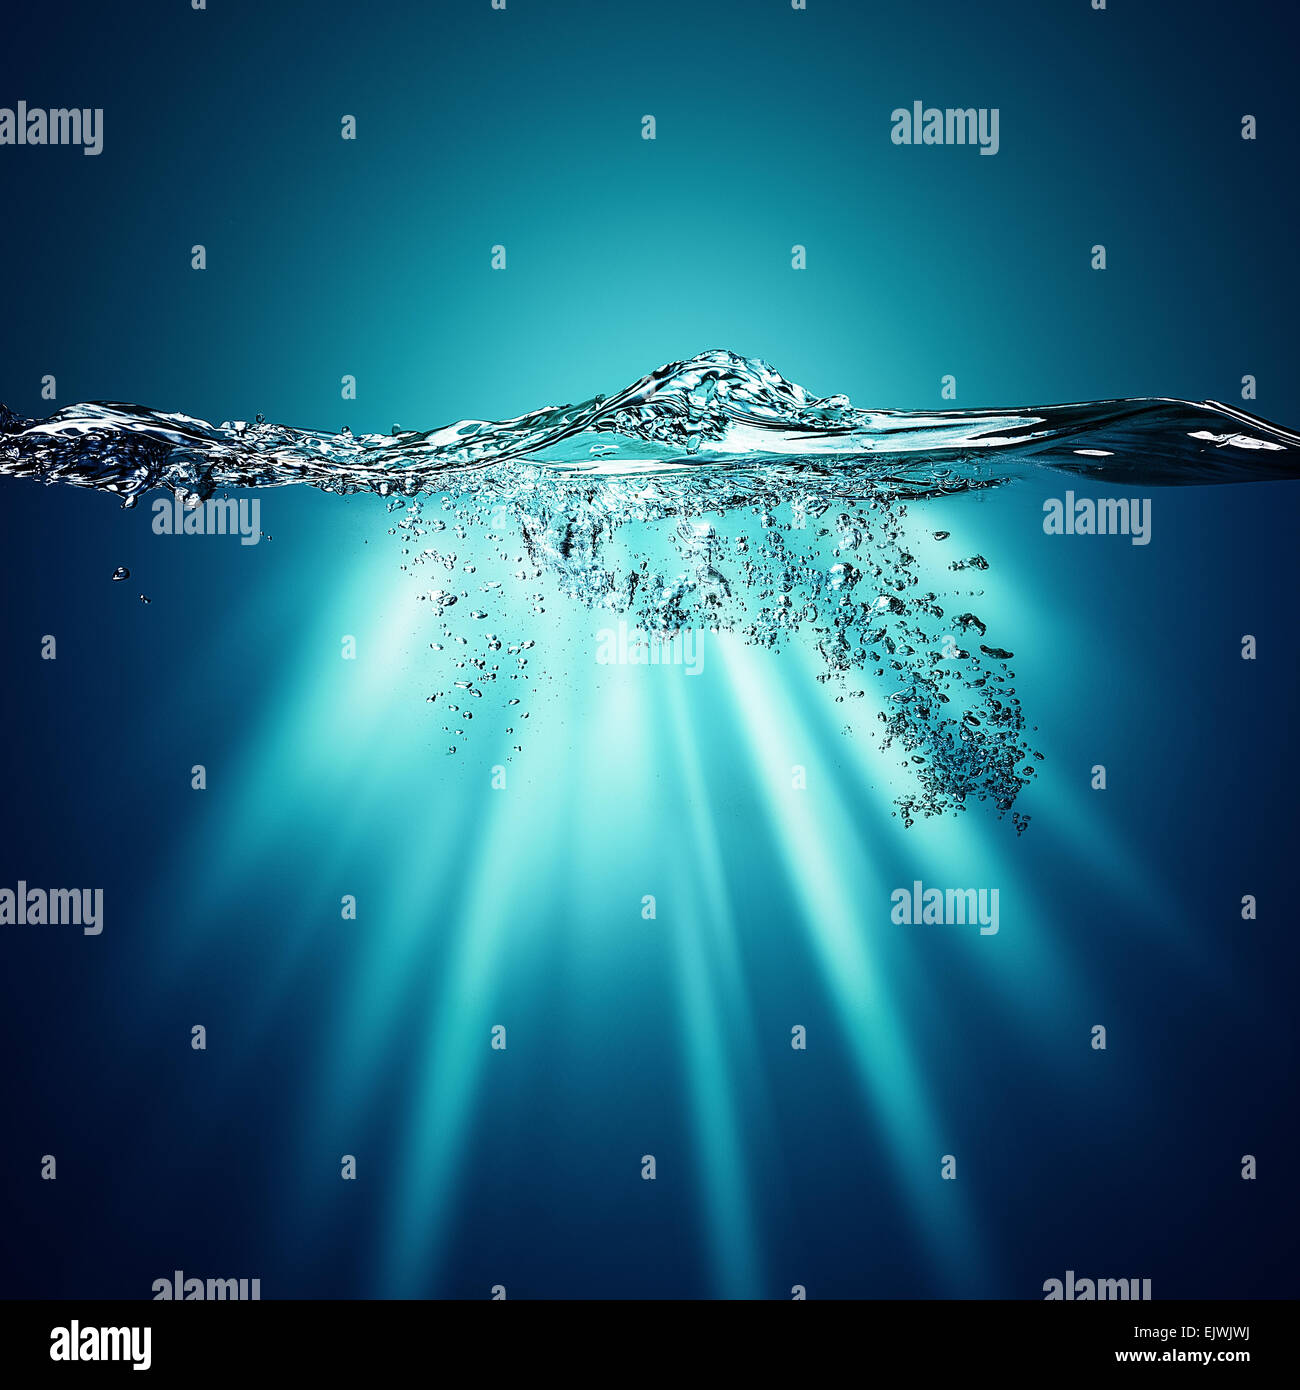 Abstract underwater backgrounds with sun beam and water ripple Stock Photo